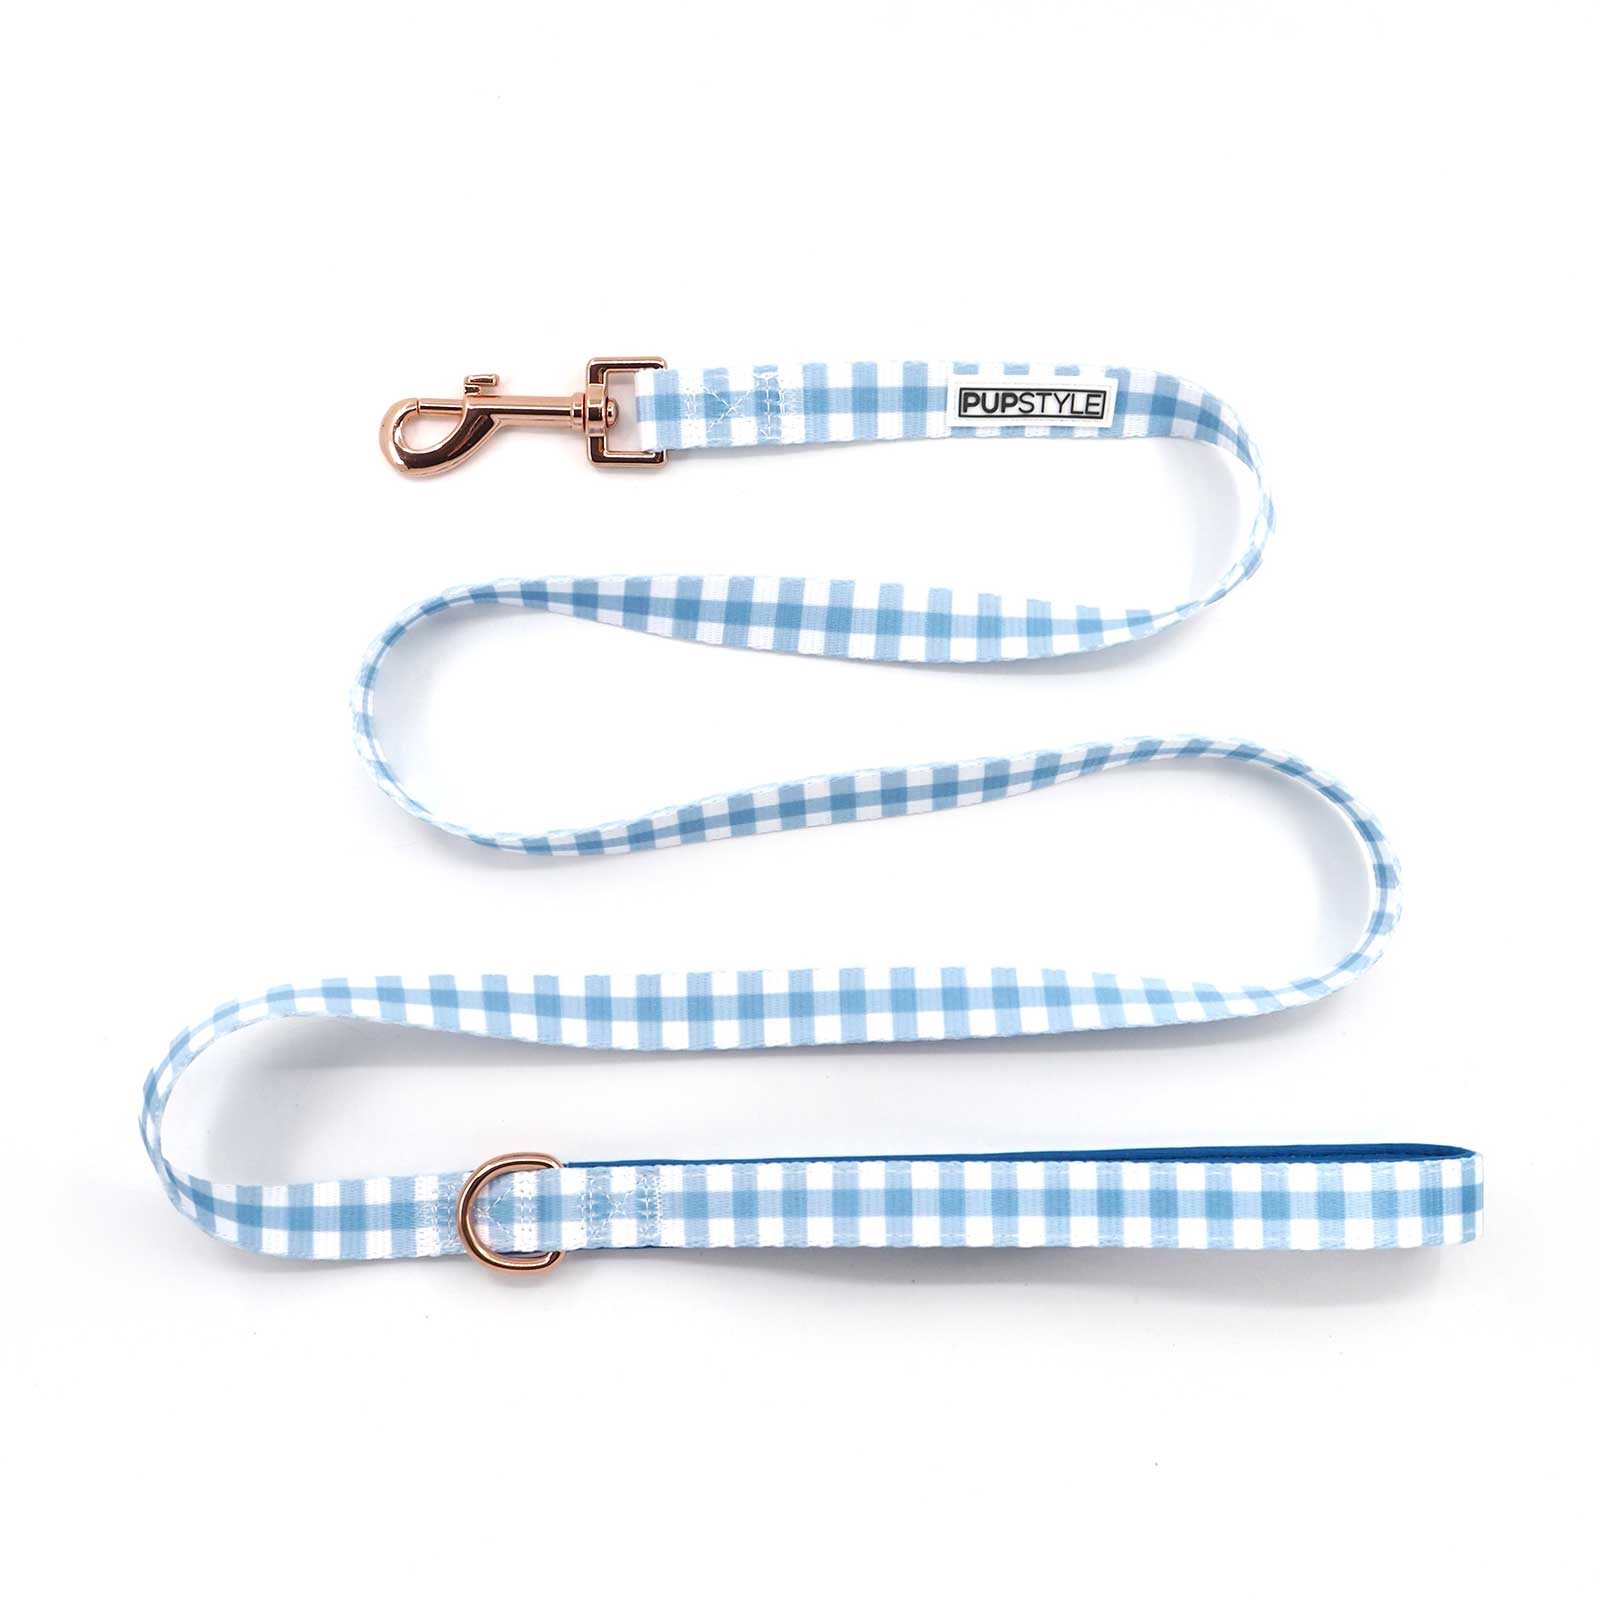 Pupstyle Dog Lead Blueberry Muffin